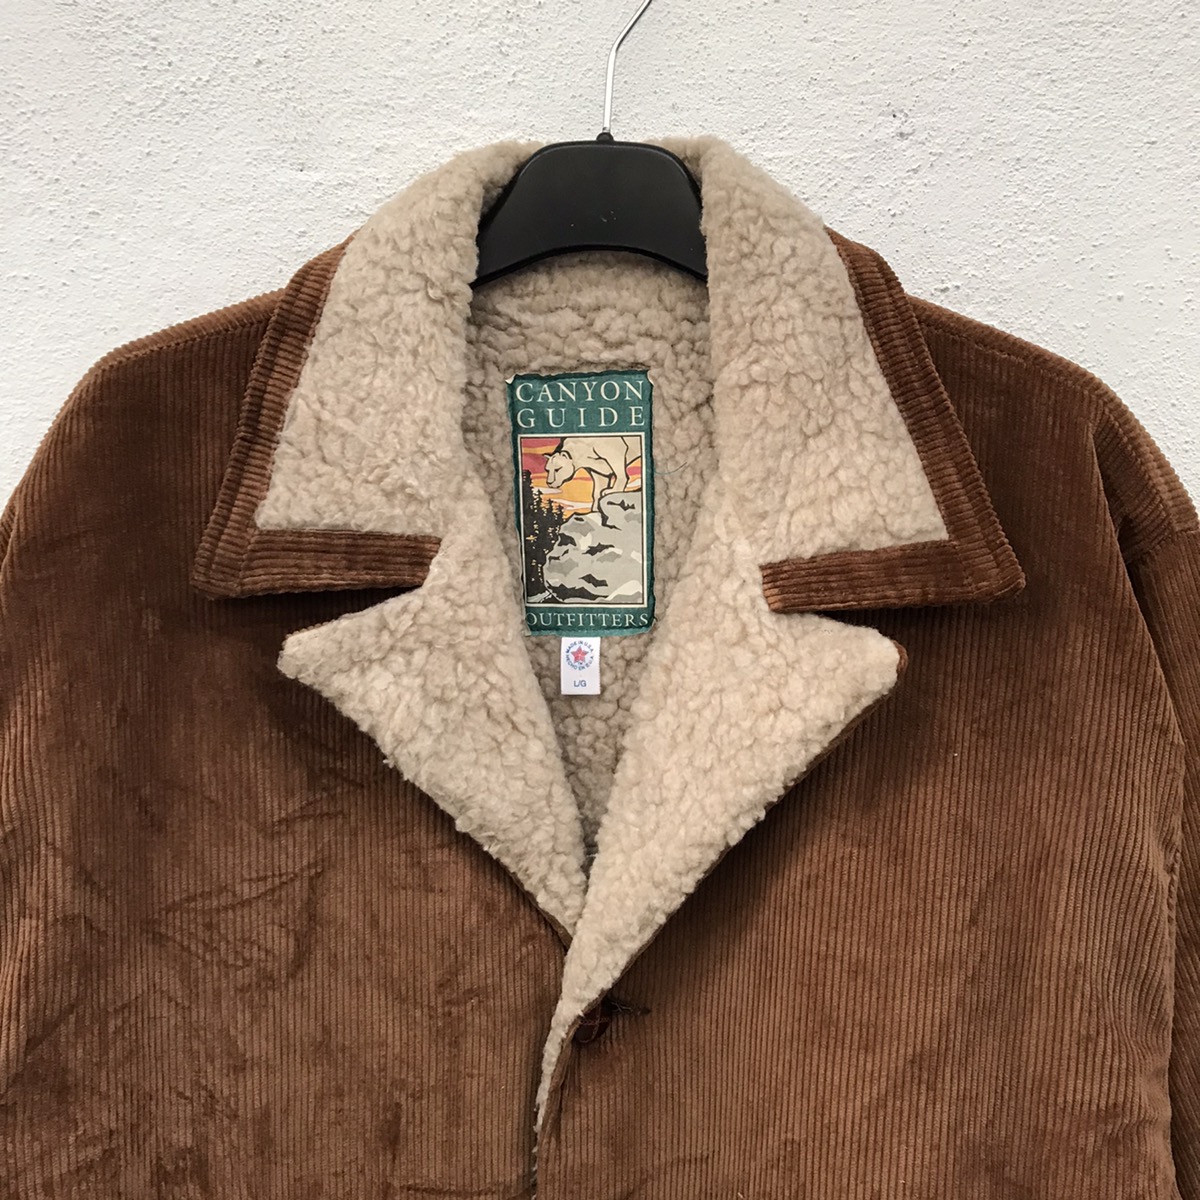 Vintage - Canyon Guide Outfitters Corduroy Jackets - 5